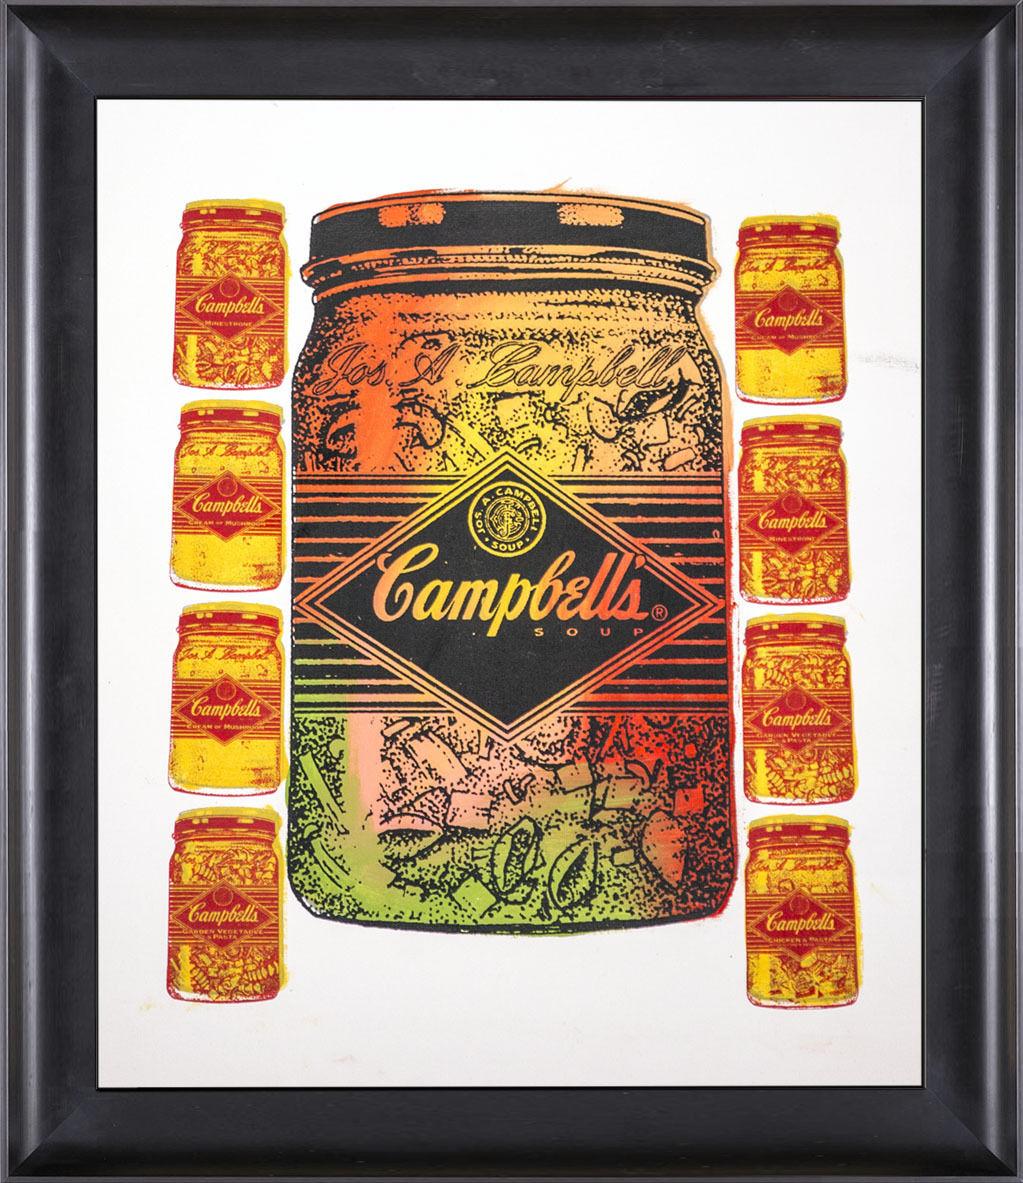 Artist: Steve Kaufman
Title: Campbells Soup
Medium: Original Oil Painting on Screen print Canvas
Size: 17" x 26.5"
Size Framed: Currently not Framed.  Photos Generated to give you an idea
Edition size: 50/50 TP
Signed by the Artist

The piece comes